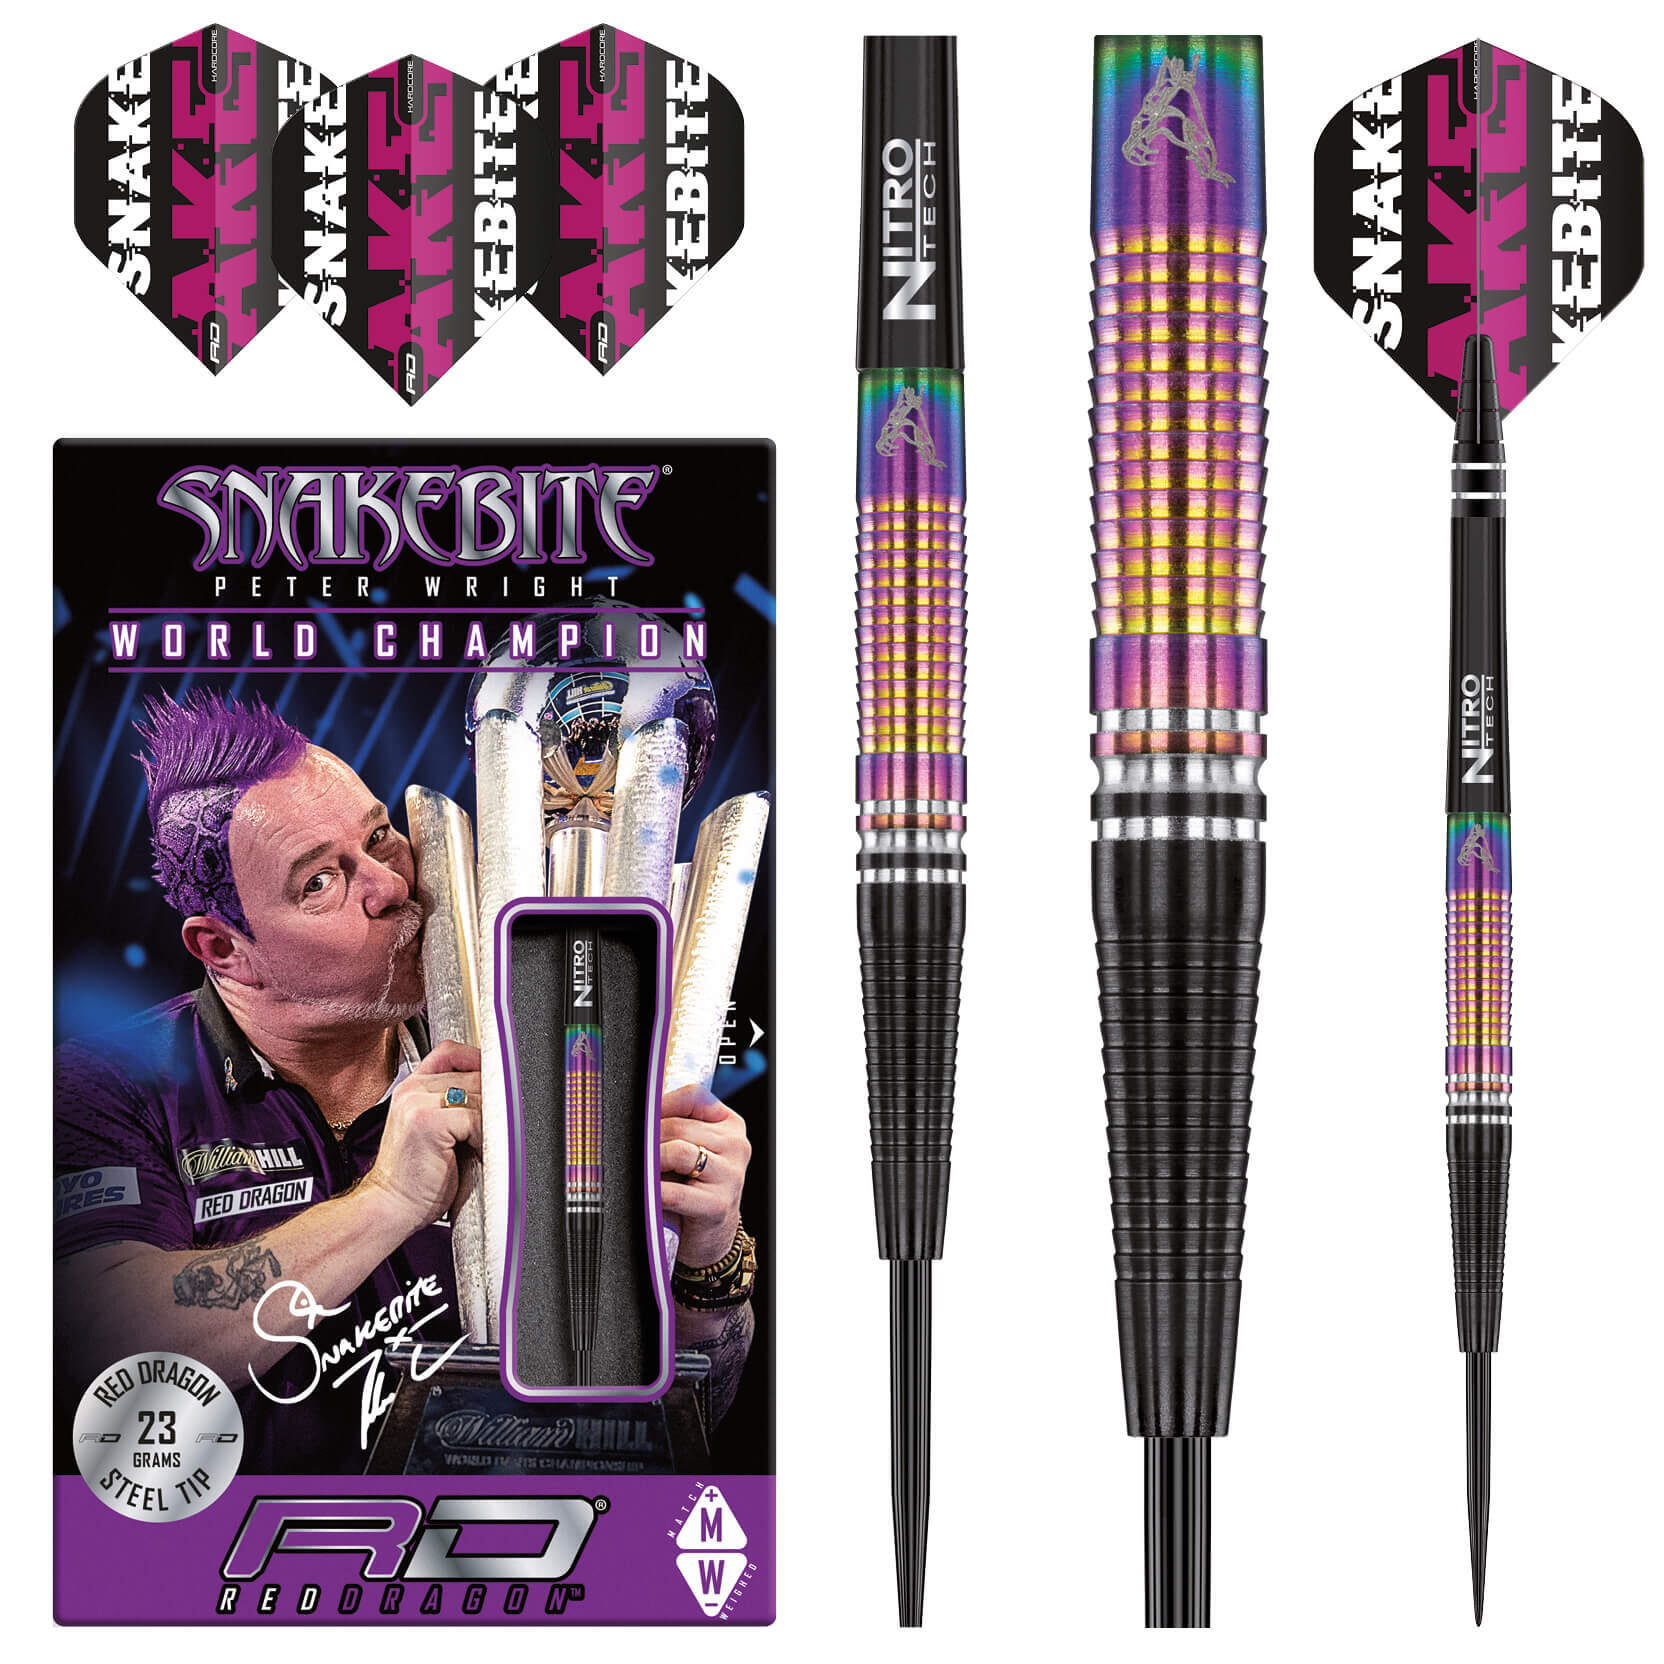 RED DRAGON DARTS Peter Wright Snakebite WC Tapered SE 23g Darts Set including Flights and Shafts